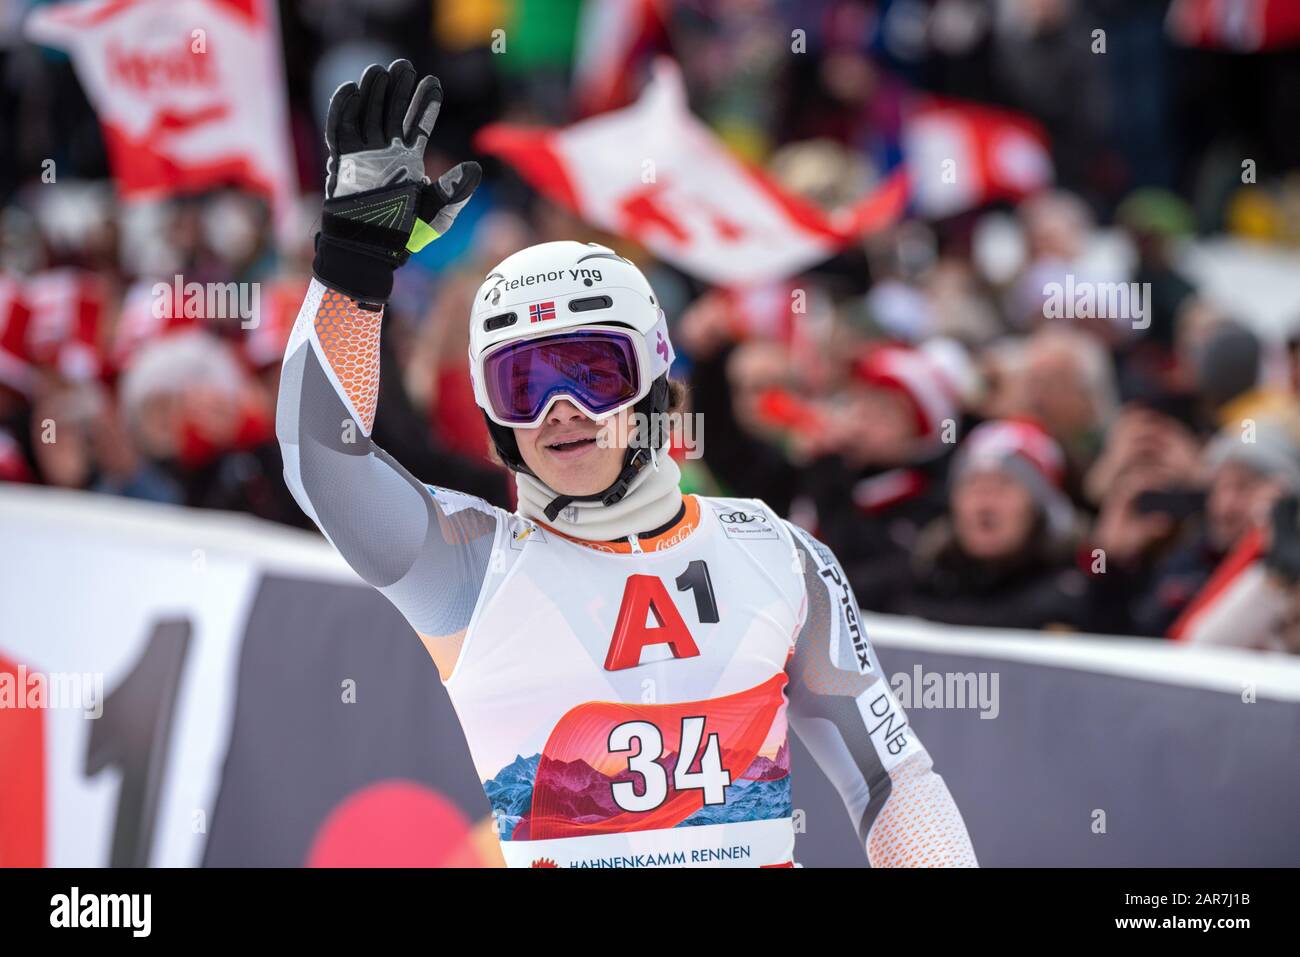 KITZBUEHEL, AUSTRIA - JANUARY 26: Cheers and joy about 4th place at Lucas Braathen of Norway at the Ski Alpin: 80. Hahnenkamm Race 2020 - Audi FIS Alpine Ski World Cup - Men's Slalom at the Ganslern on January 26, 2020 in Kitzbuehel, AUSTRIA.(Horst Ettensberger/ESPA-Images) Stock Photo